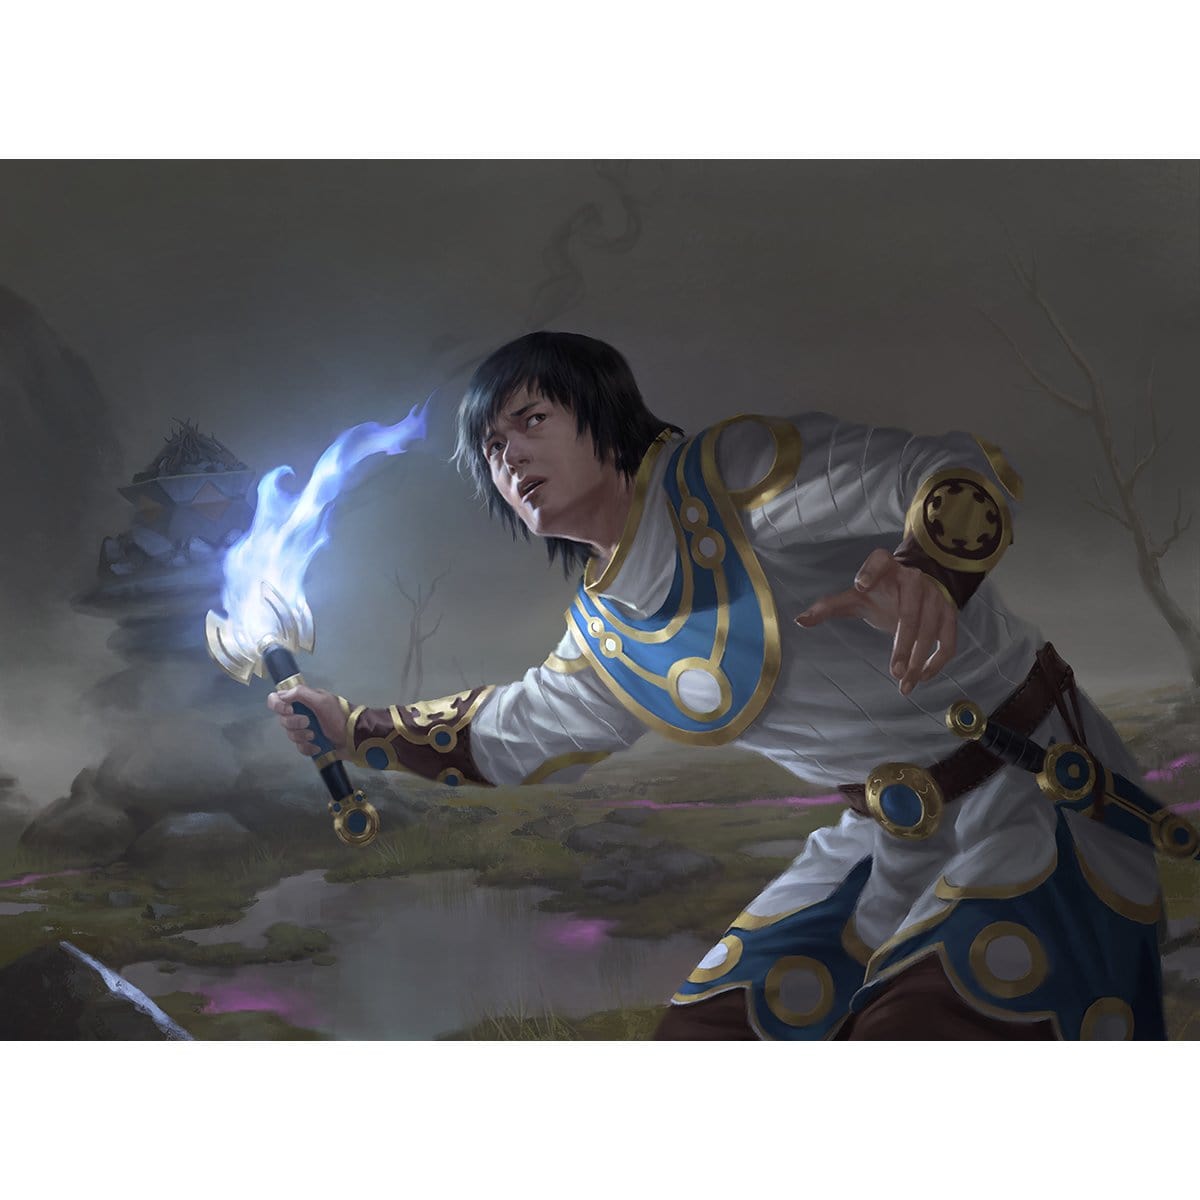 Silverflame Squire Print - Print - Original Magic Art - Accessories for Magic the Gathering and other card games